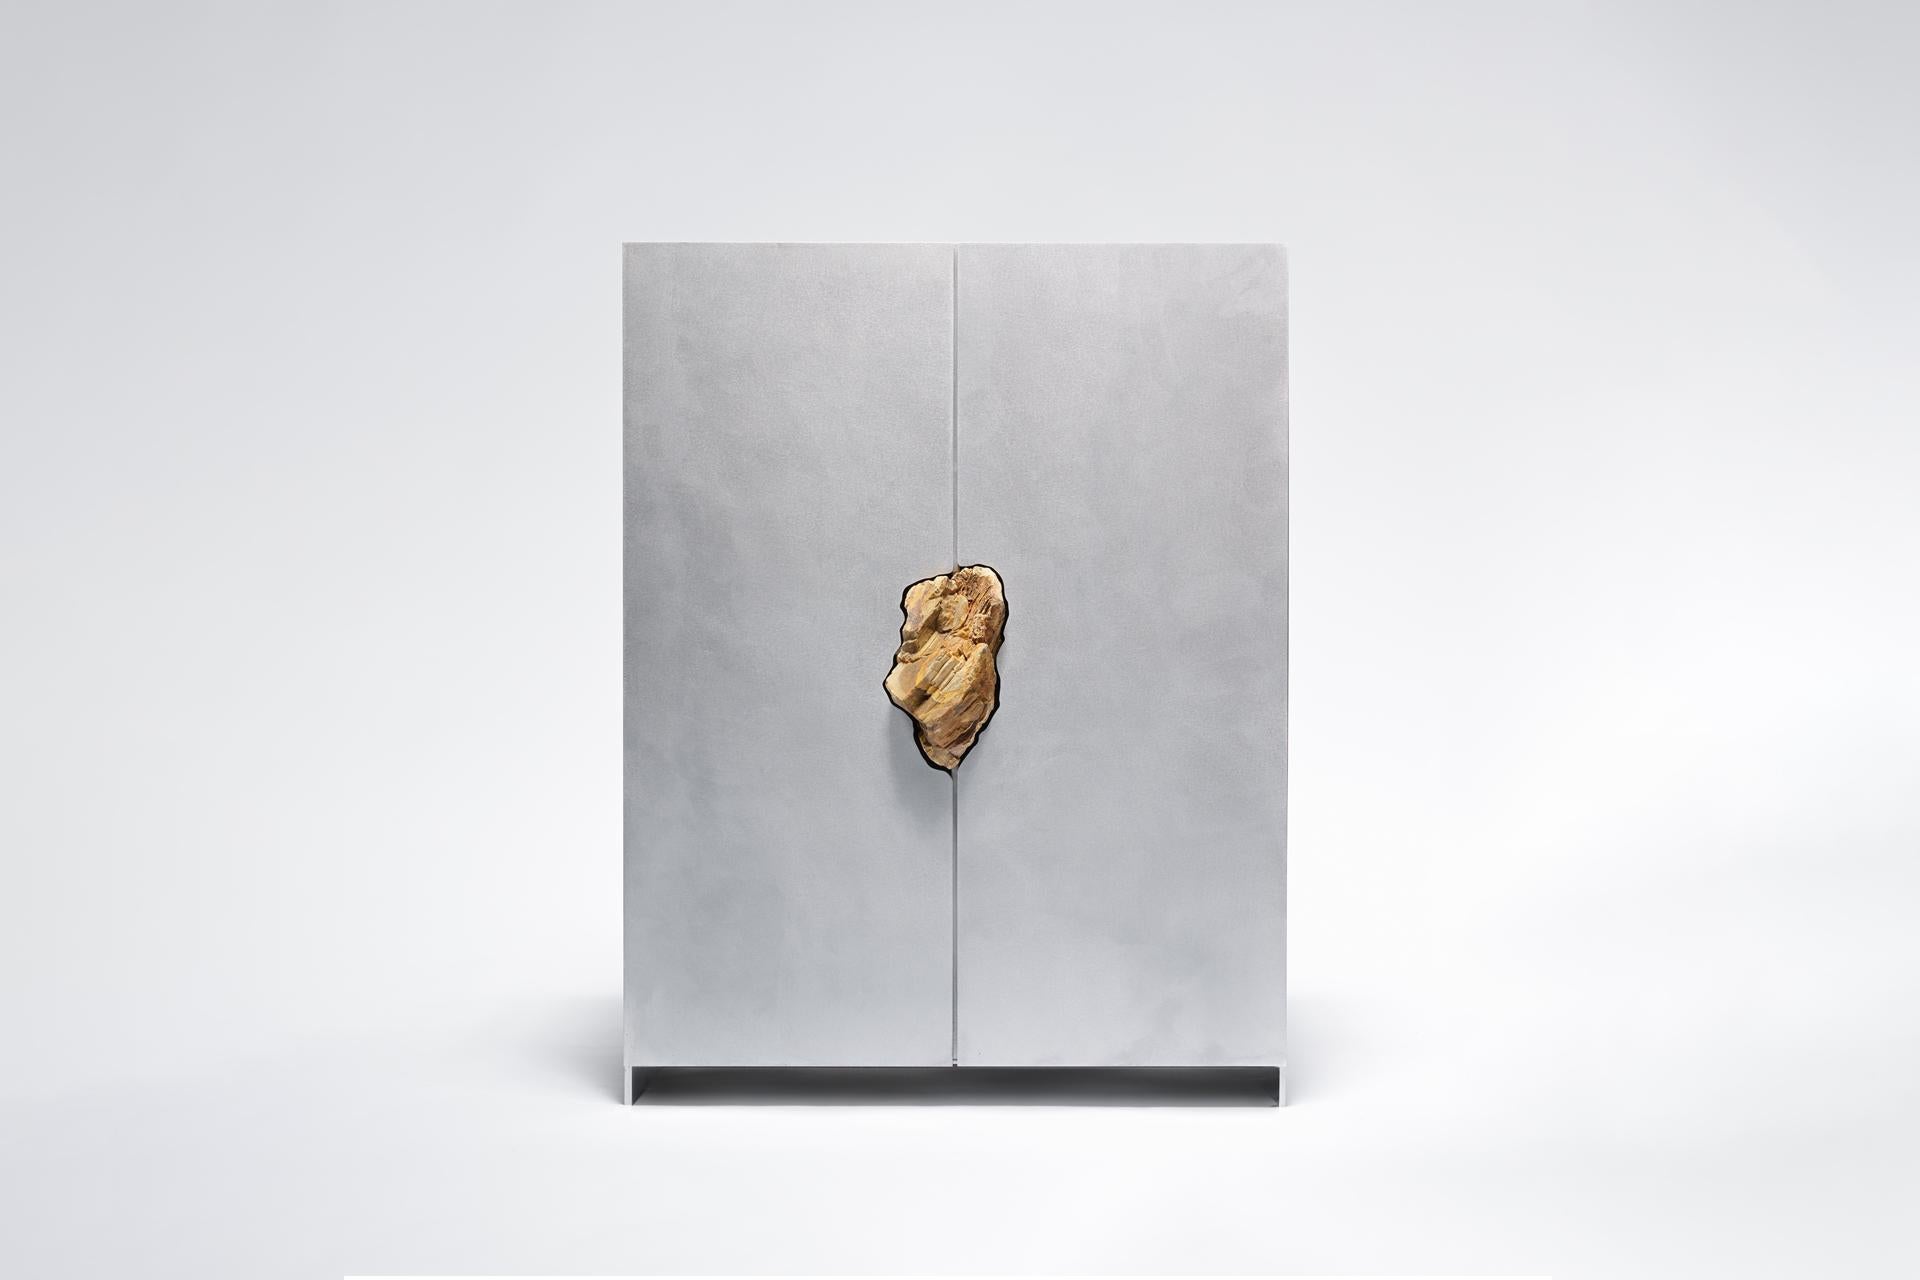 Hand-sculpted cabinet with original petrified oak, Pierre De Valck
Oxidized and waxed aluminium -unique and signed
Measures: 55 x 34 x 70 cm

Small sized cabinet with two hinged doors and four shelves. Mid-cabinet sits a fragment of Petrified